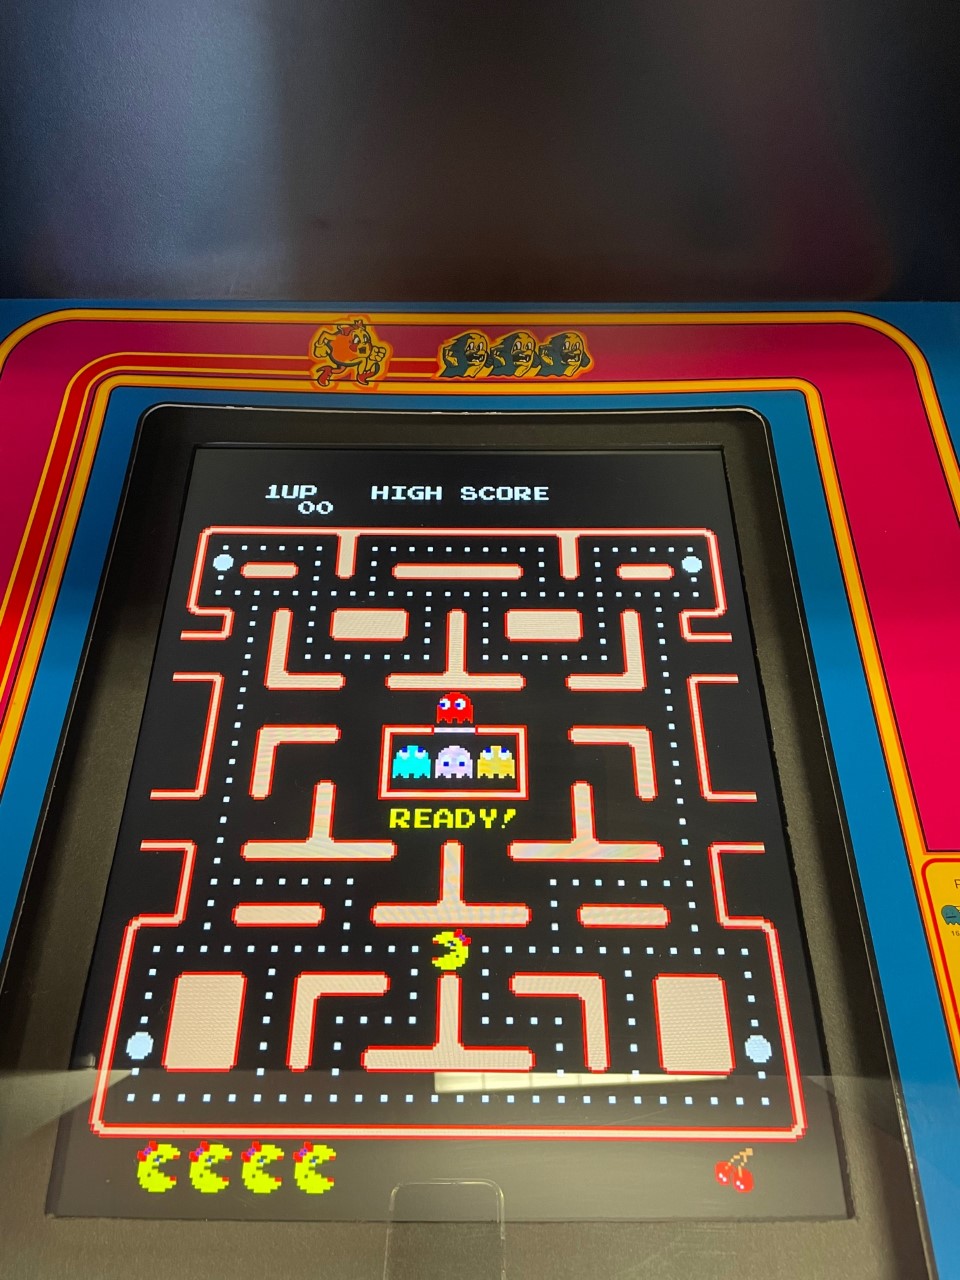 Pacman Arcade Multi Game With Built in Fridge! Plays 60 to 400 Games! For  Sale | Billiards N More